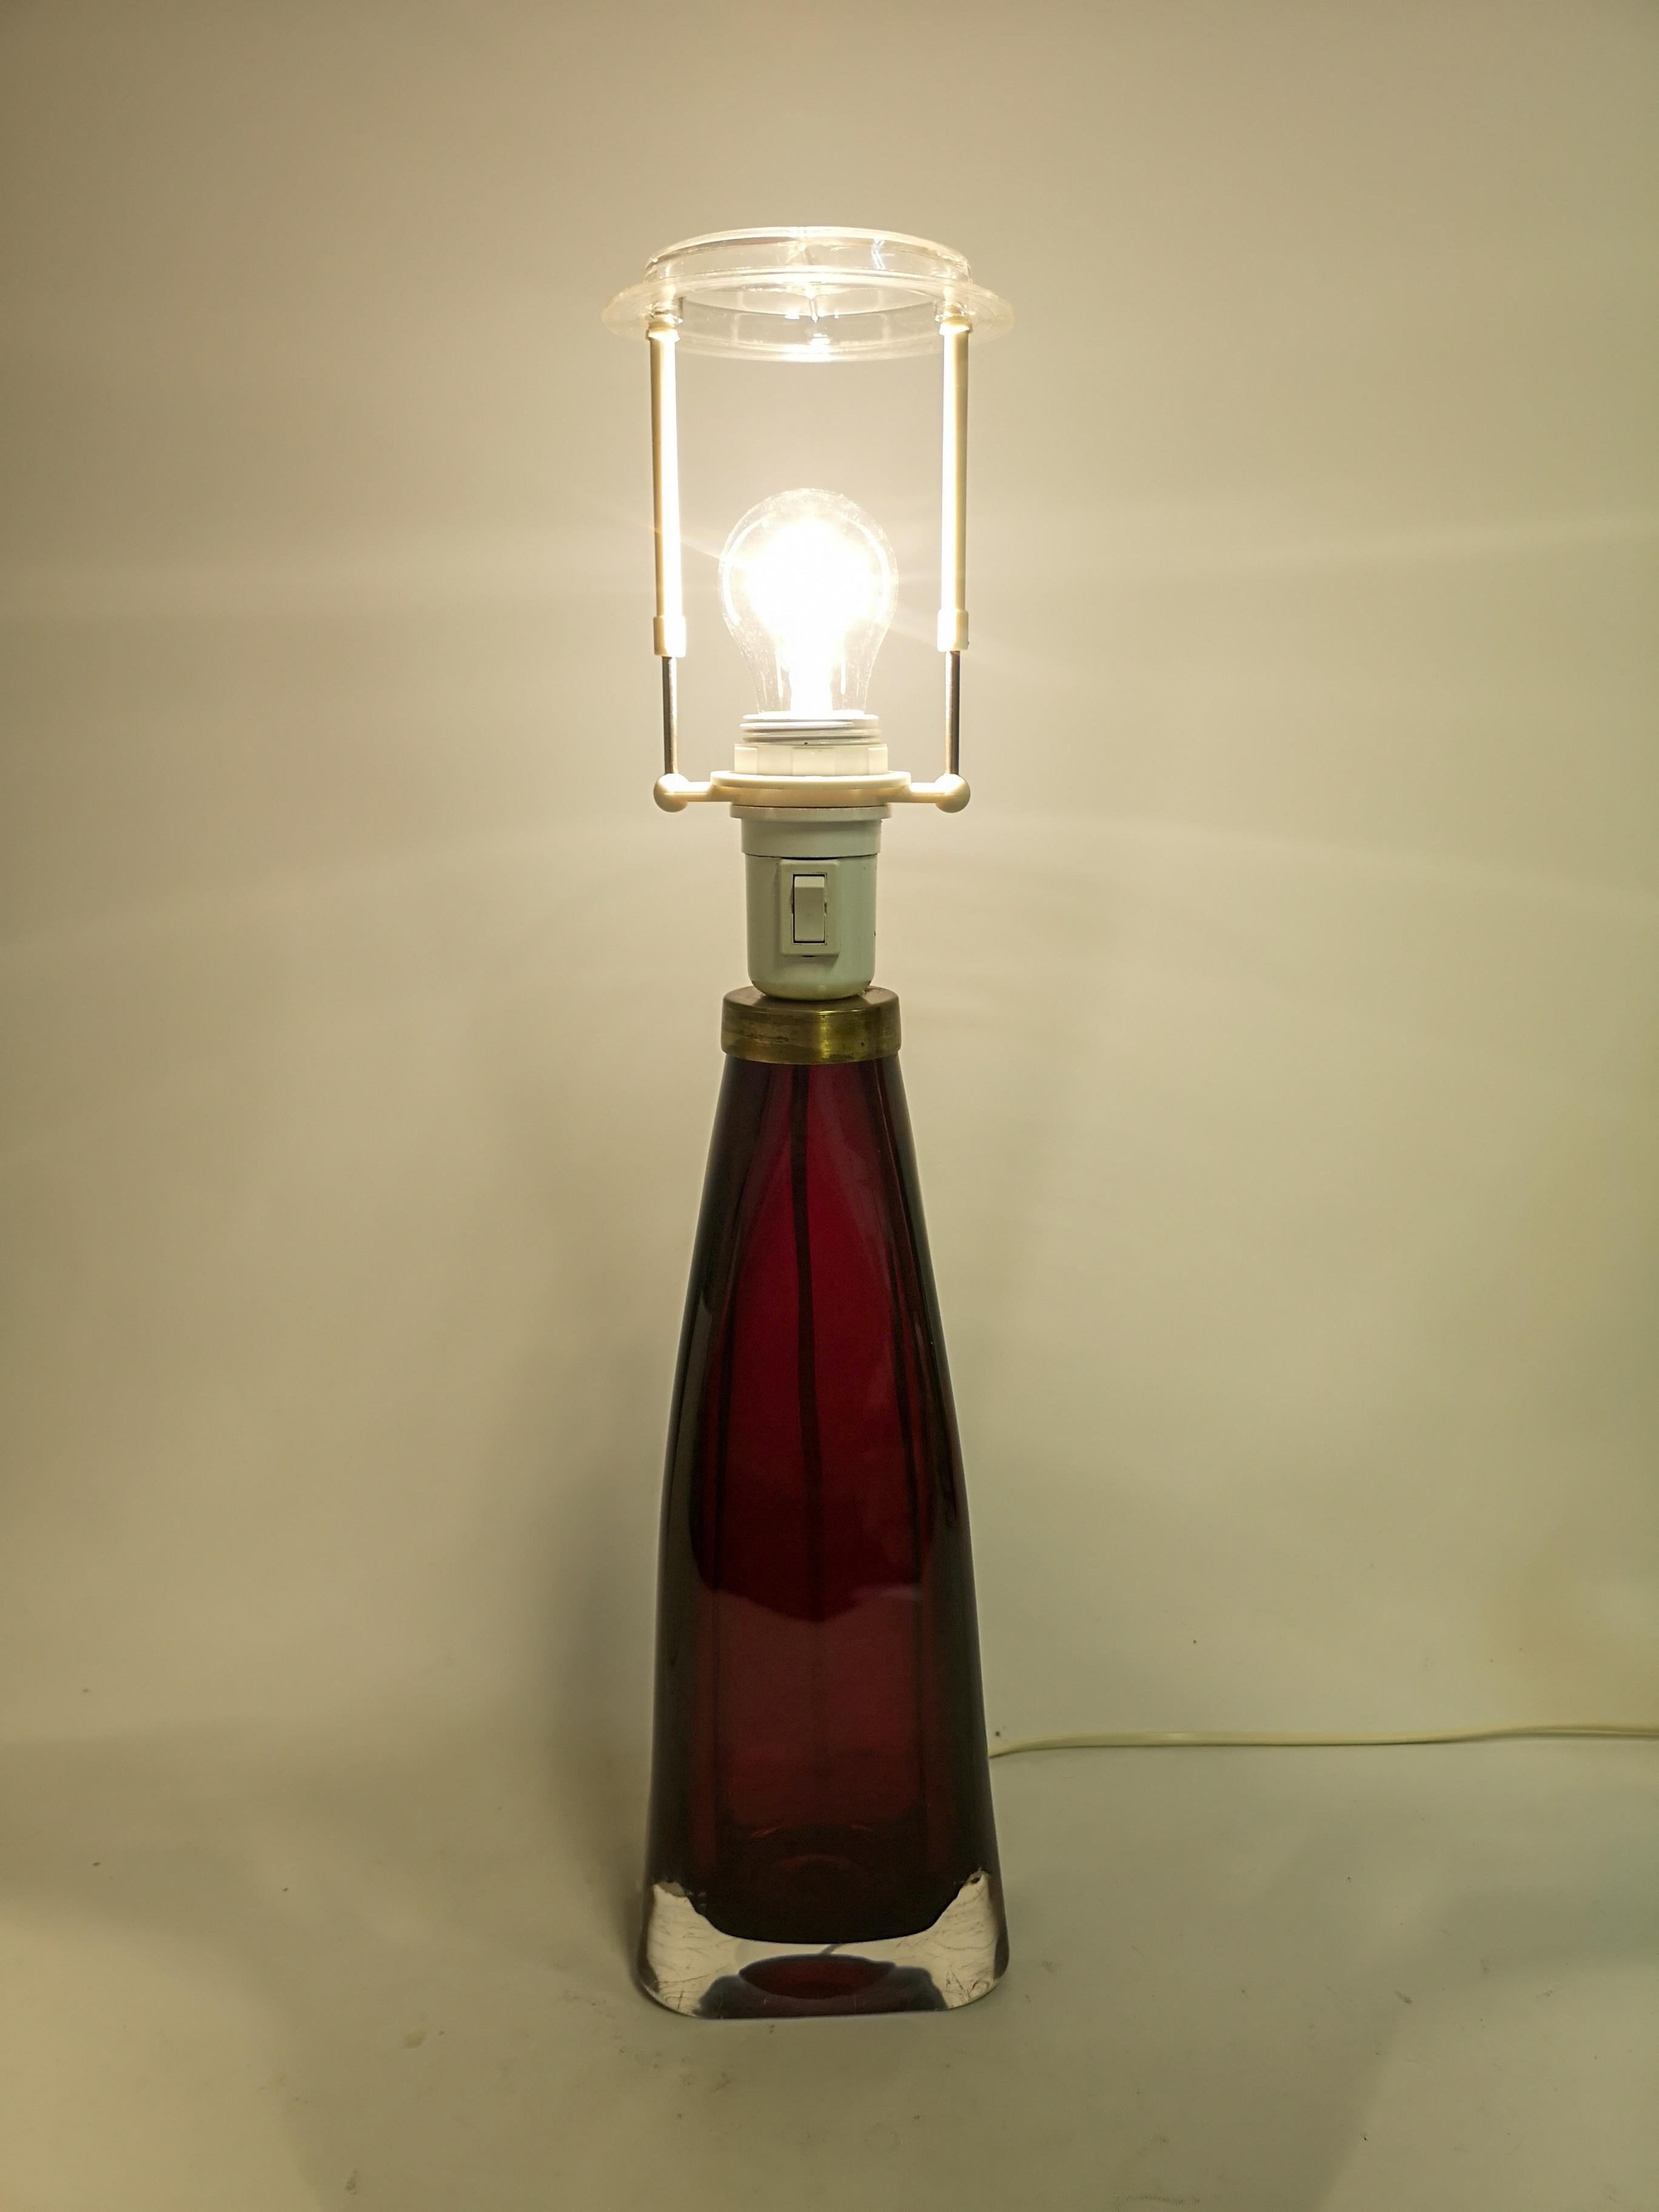 Midcentury Table Lamp by Carl Fagerlund for Orrefors Sweden RD 1323 1